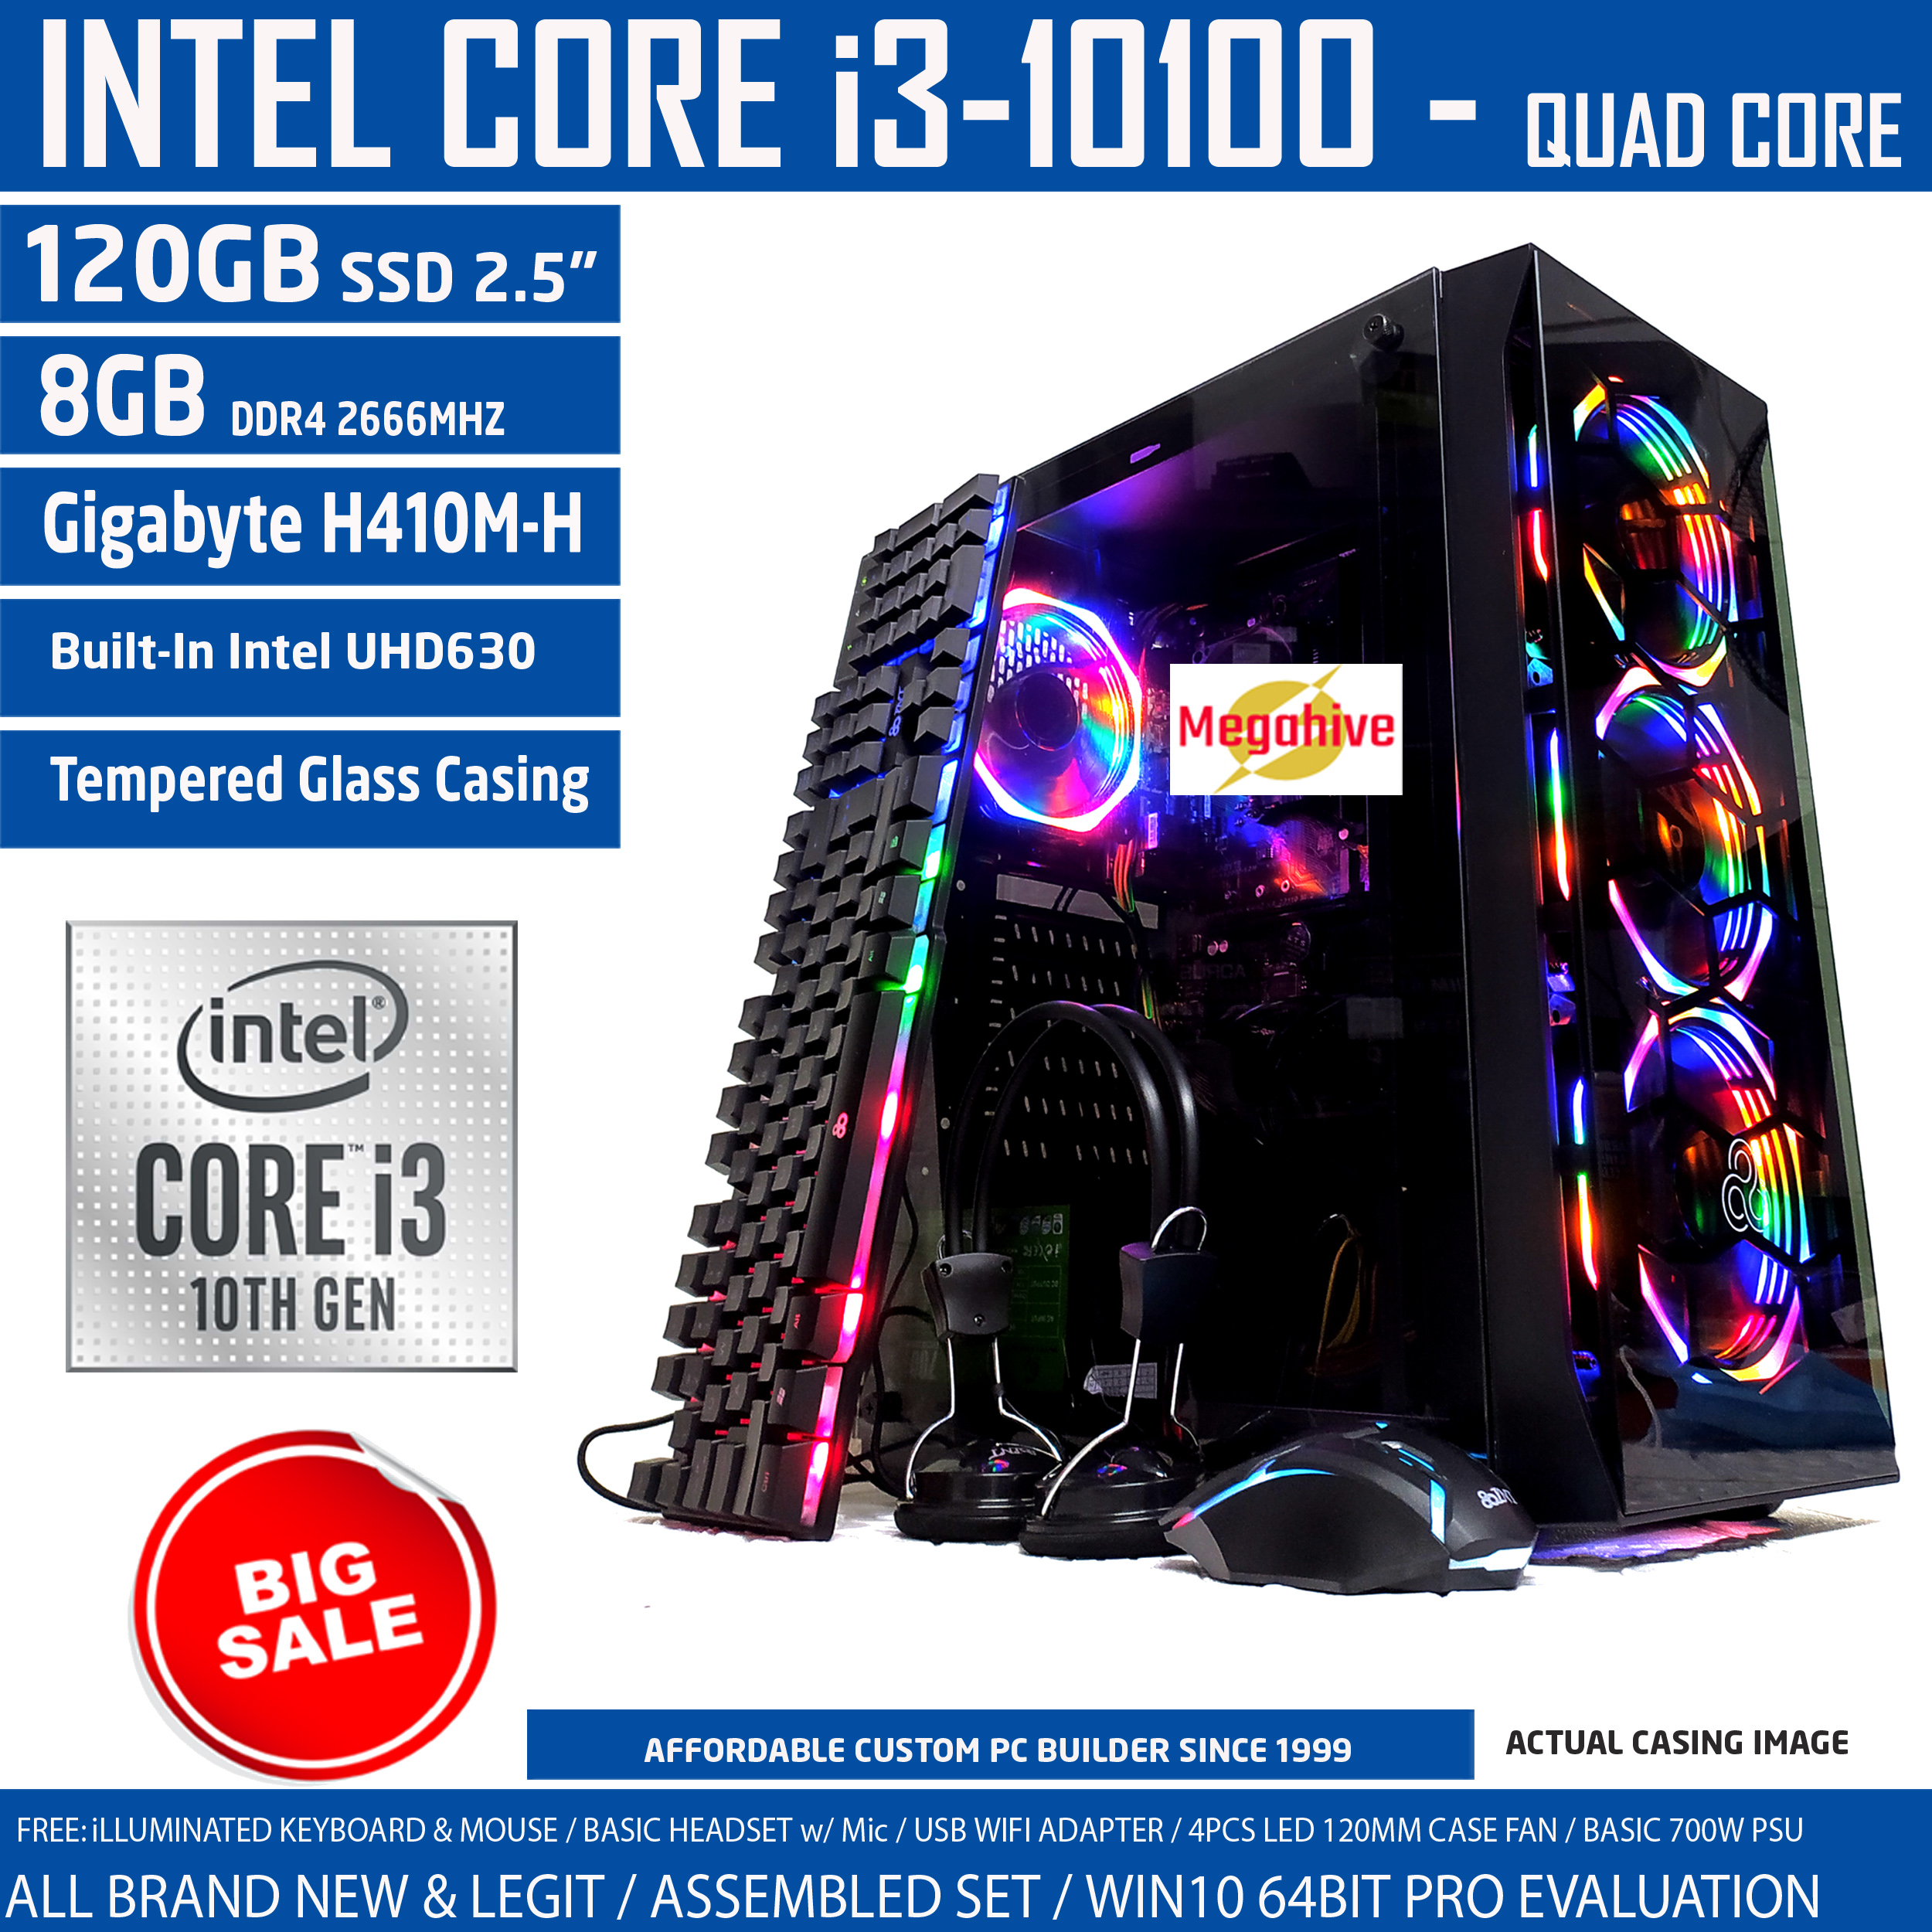 Ryzen 5 3600 Gaming Pc Shop Ryzen 5 3600 Gaming Pc With Great Discounts And Prices Online Lazada Philippines